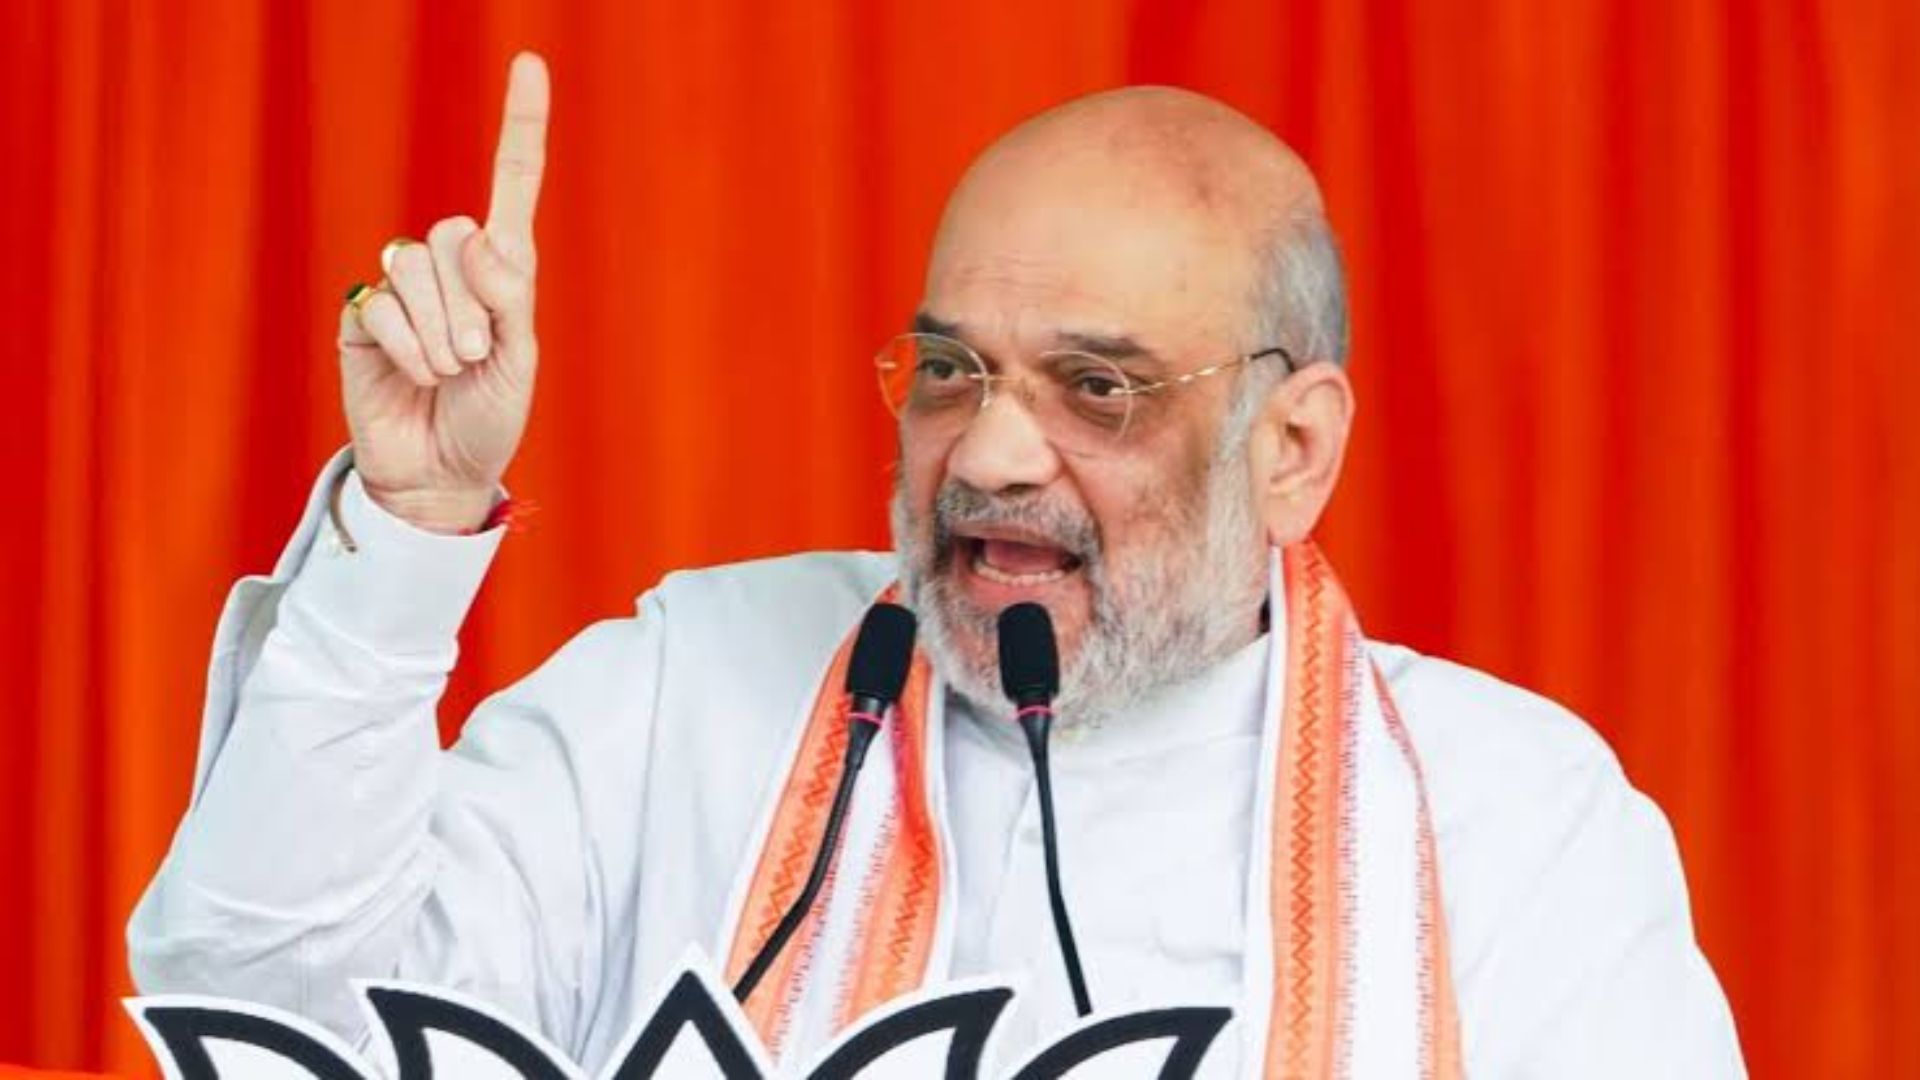 “Women of this country stand like a rock with PM Modi”: Amit Shah hits out at Rahul Gandhi over ‘Shakti’ remark